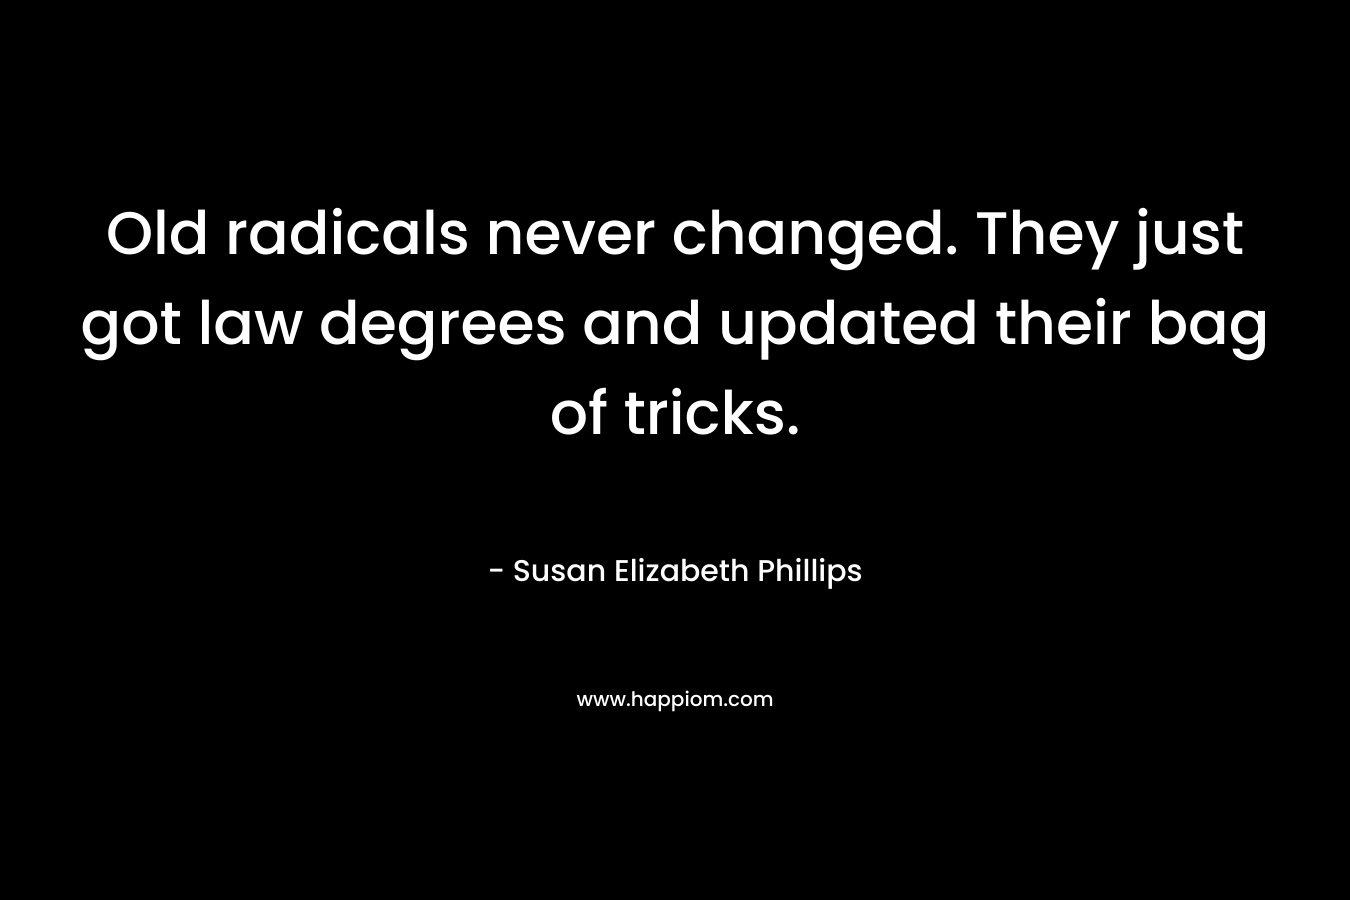 Old radicals never changed. They just got law degrees and updated their bag of tricks.